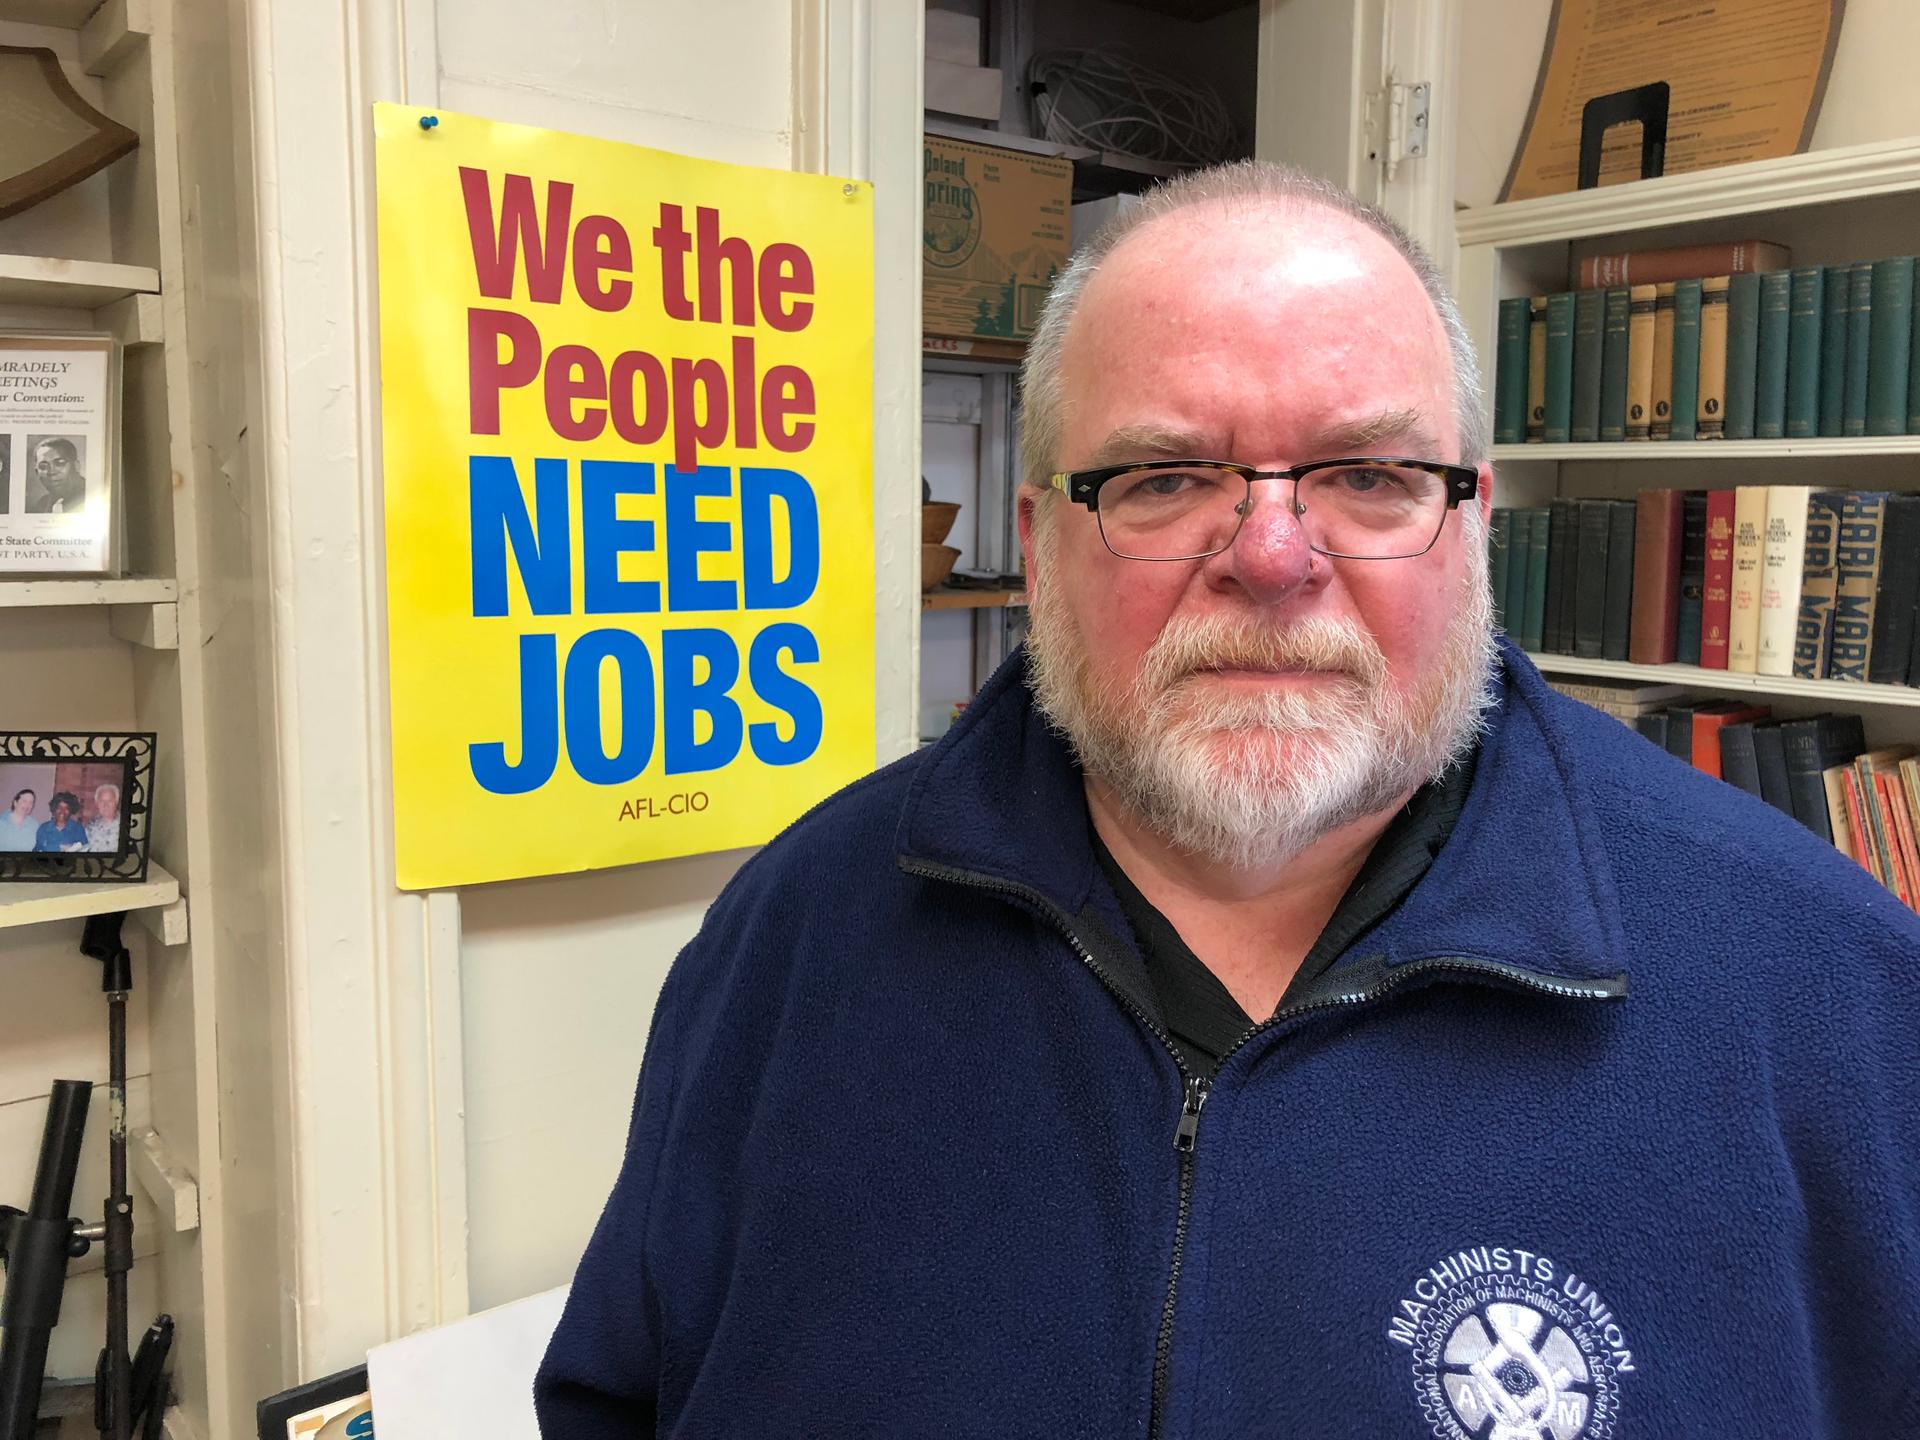 Labor leader John Harrity in Connecticut said if a revised NAFTA doesn’t include stronger protections for workers and the environment, it’s time to “scrap the whole thing and go back to where we were.”